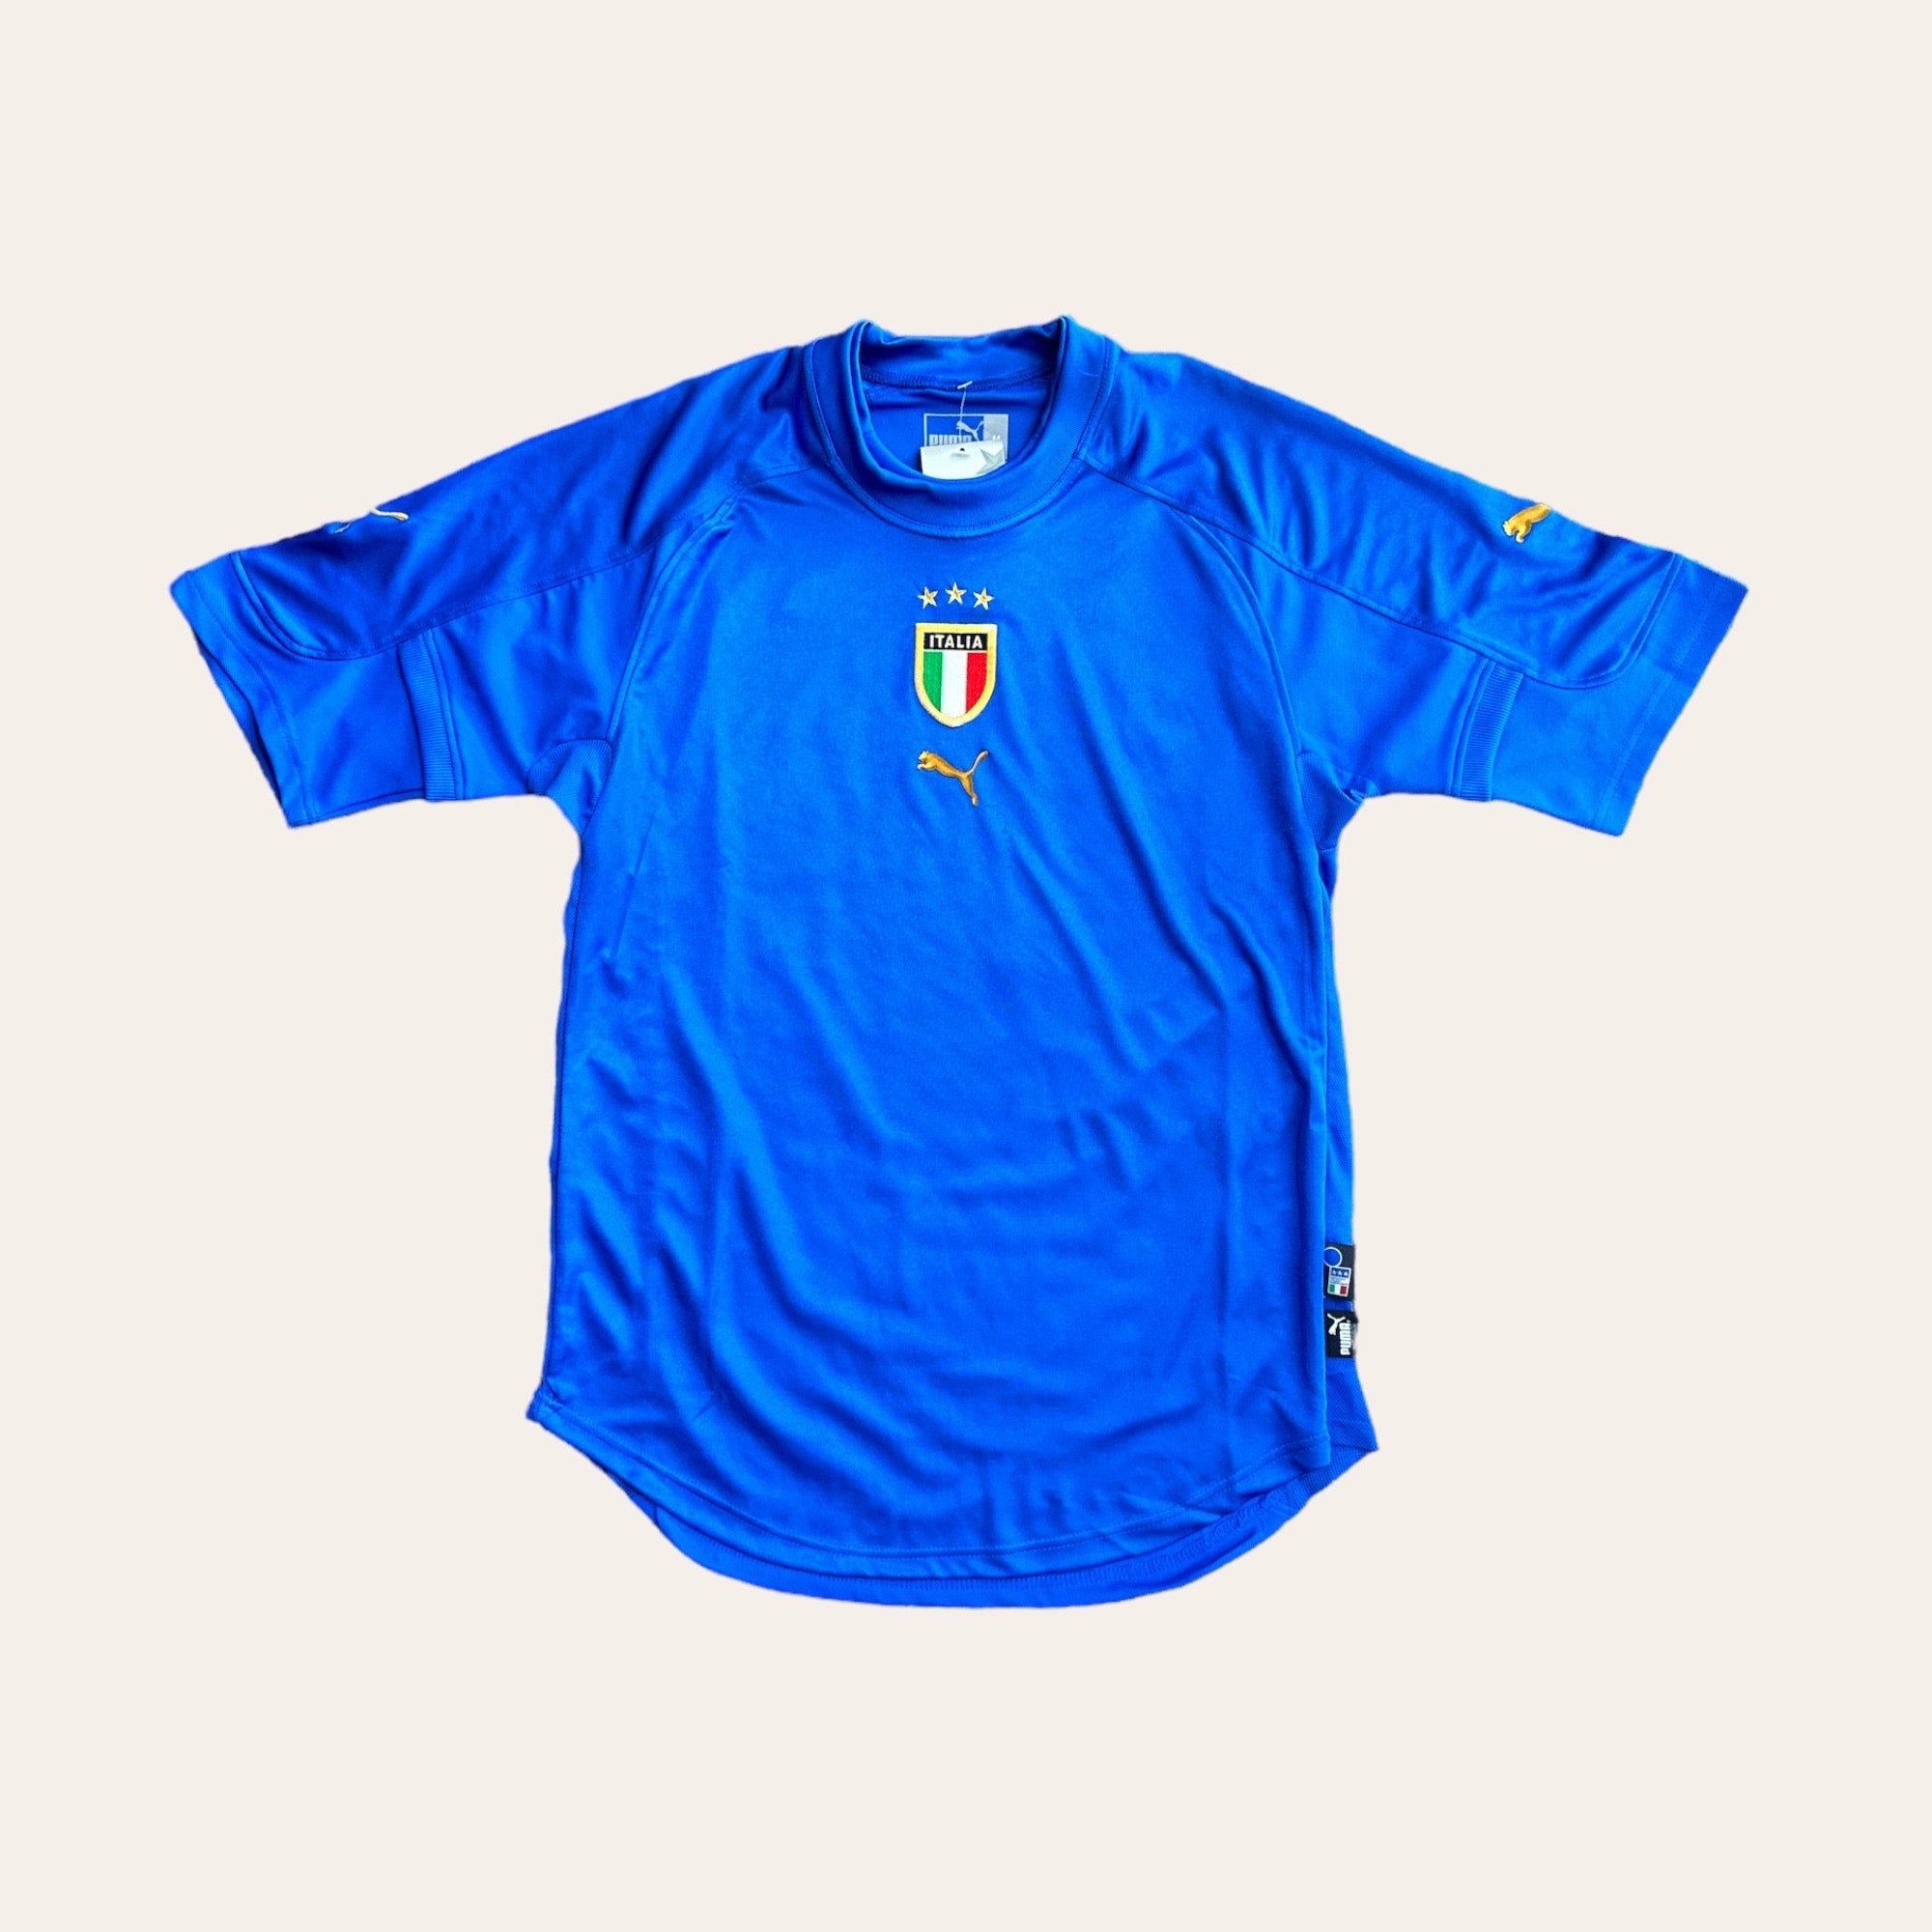 04/05 Brand New Italy Kit Size M